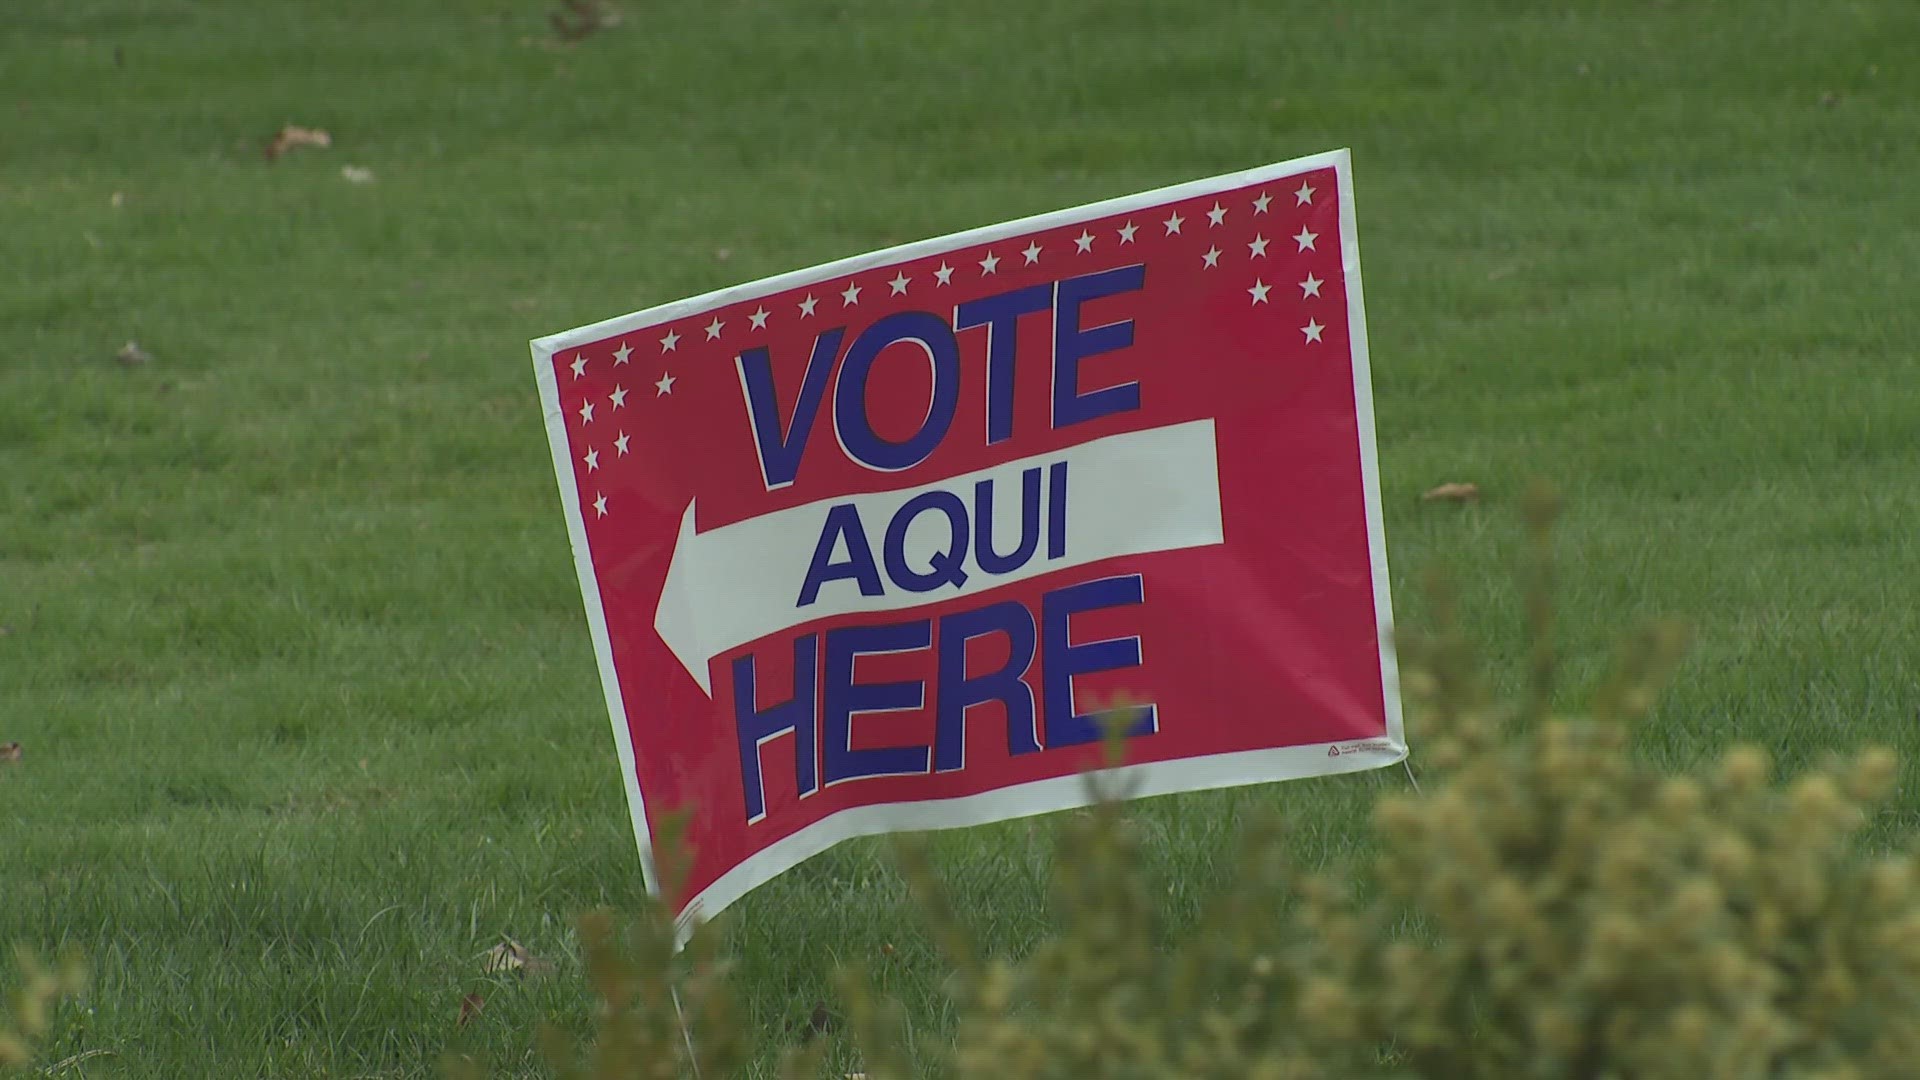 Ohio voters are heading to the polls once again.